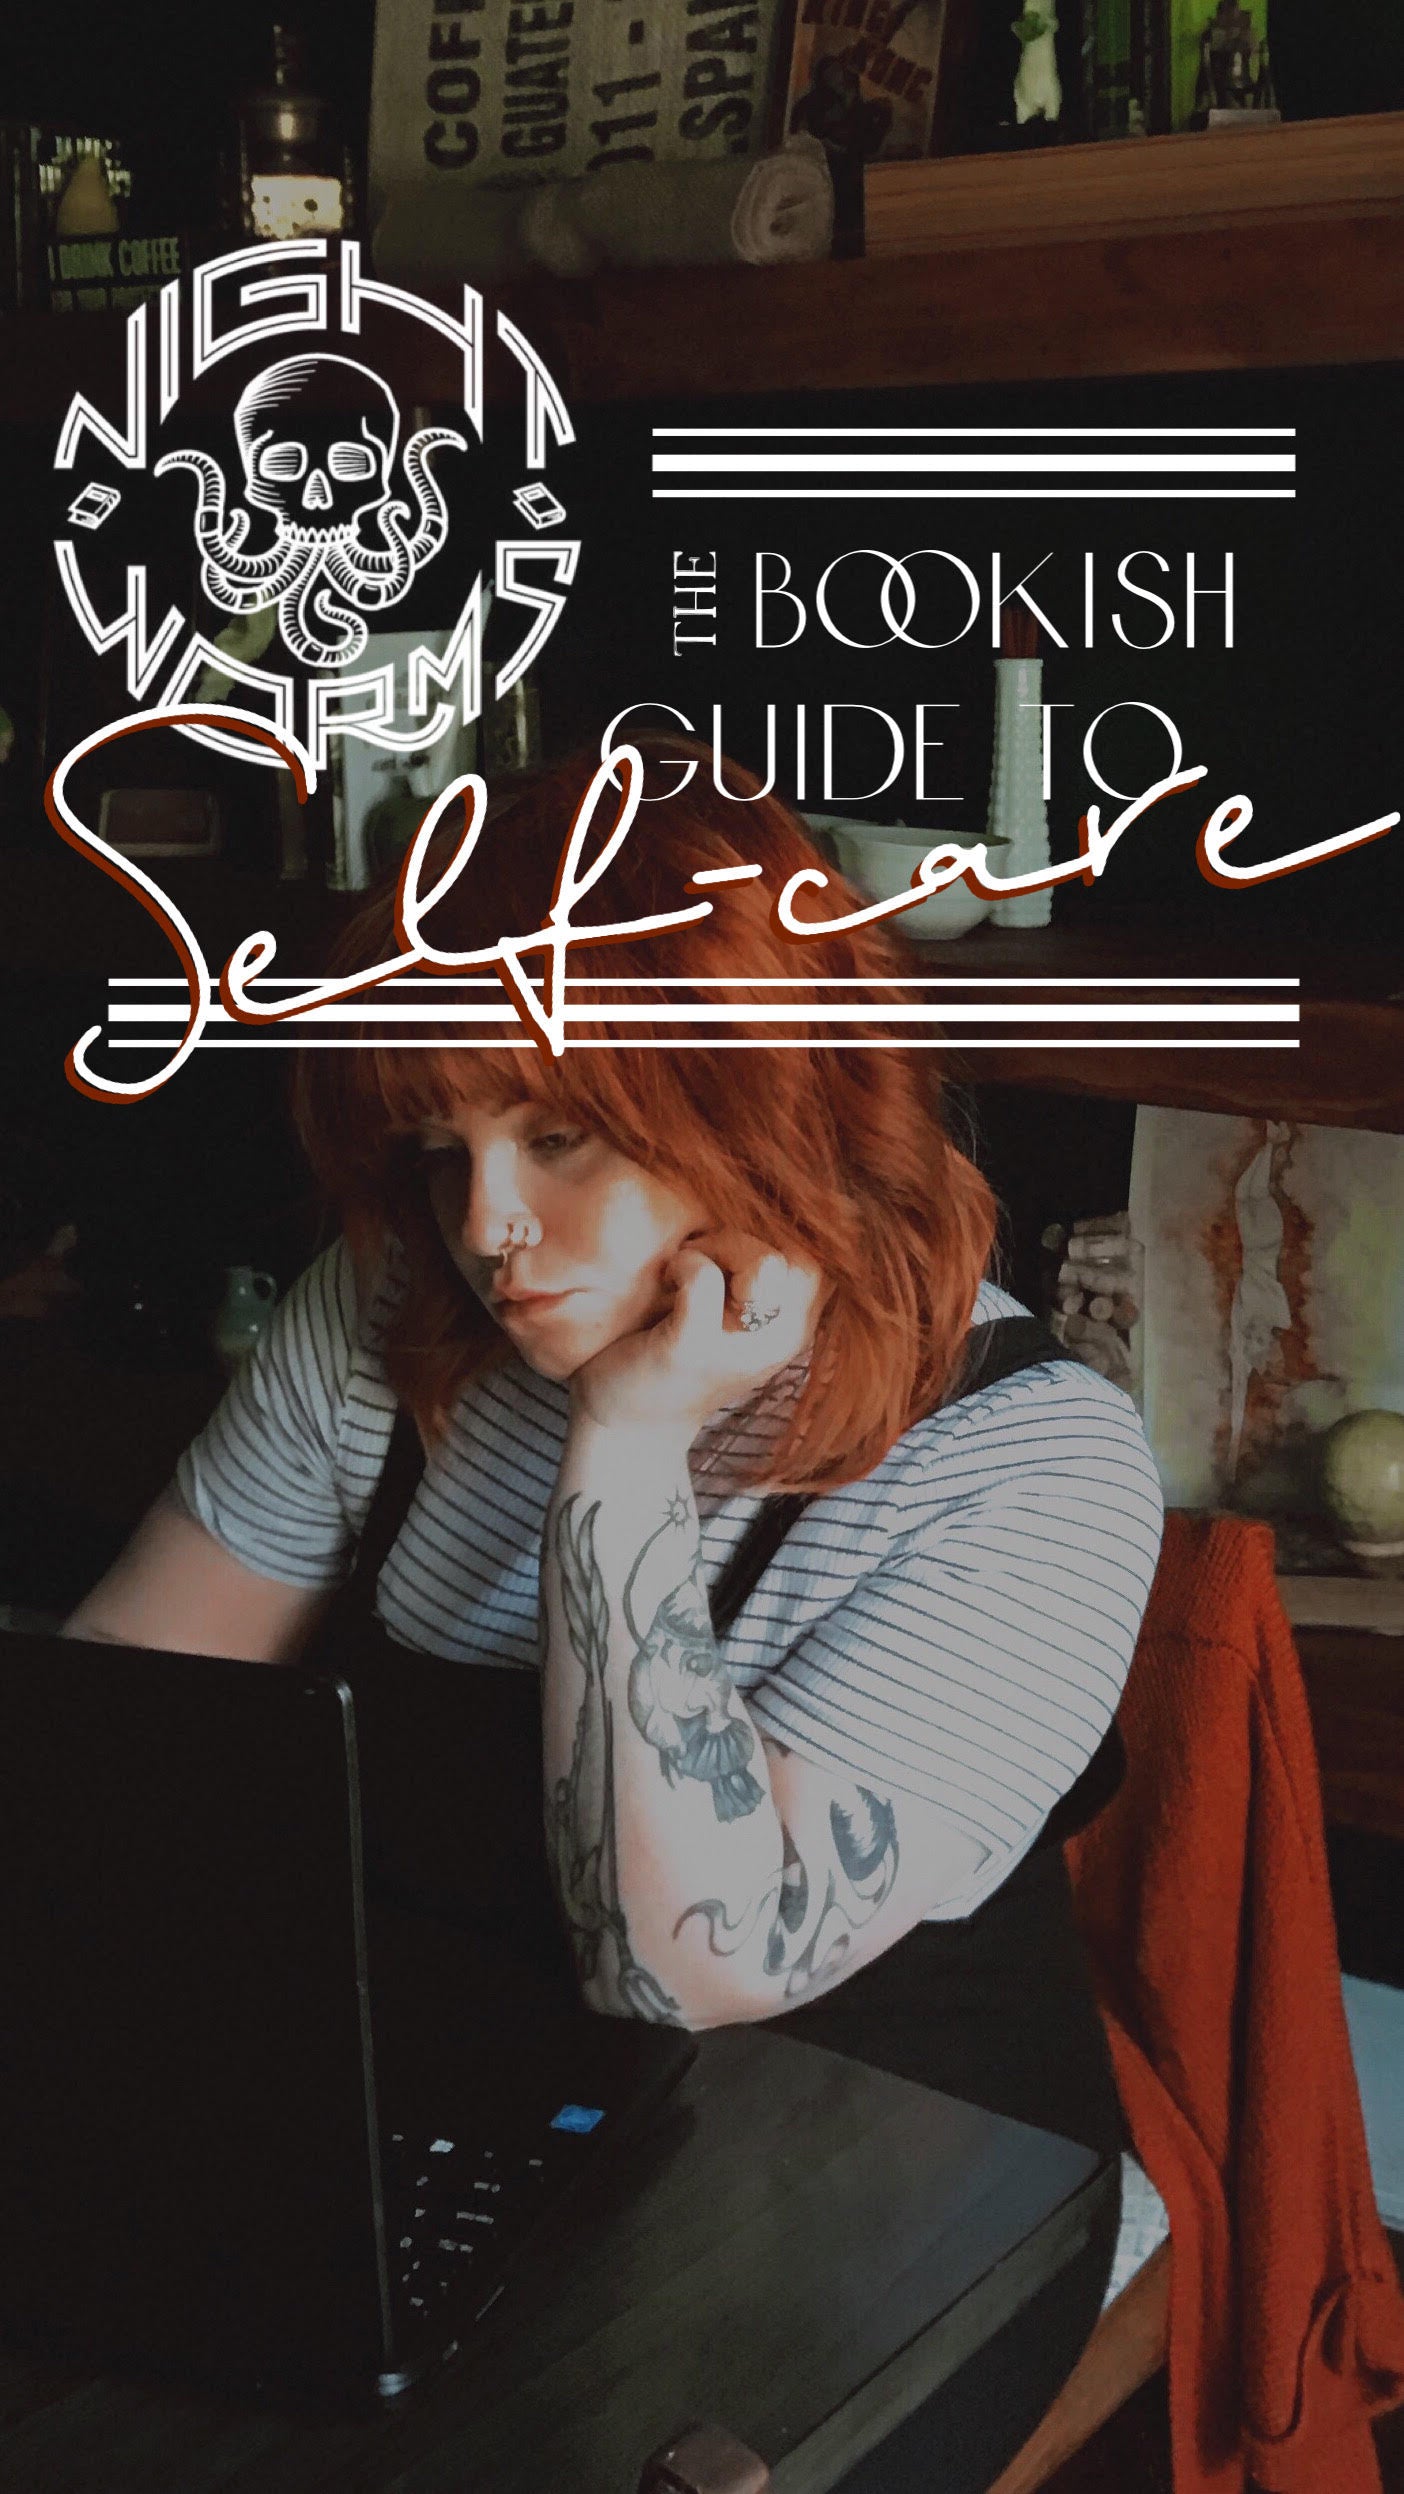 The Bookish Guide to Self Care by Kallie @pageandparlor